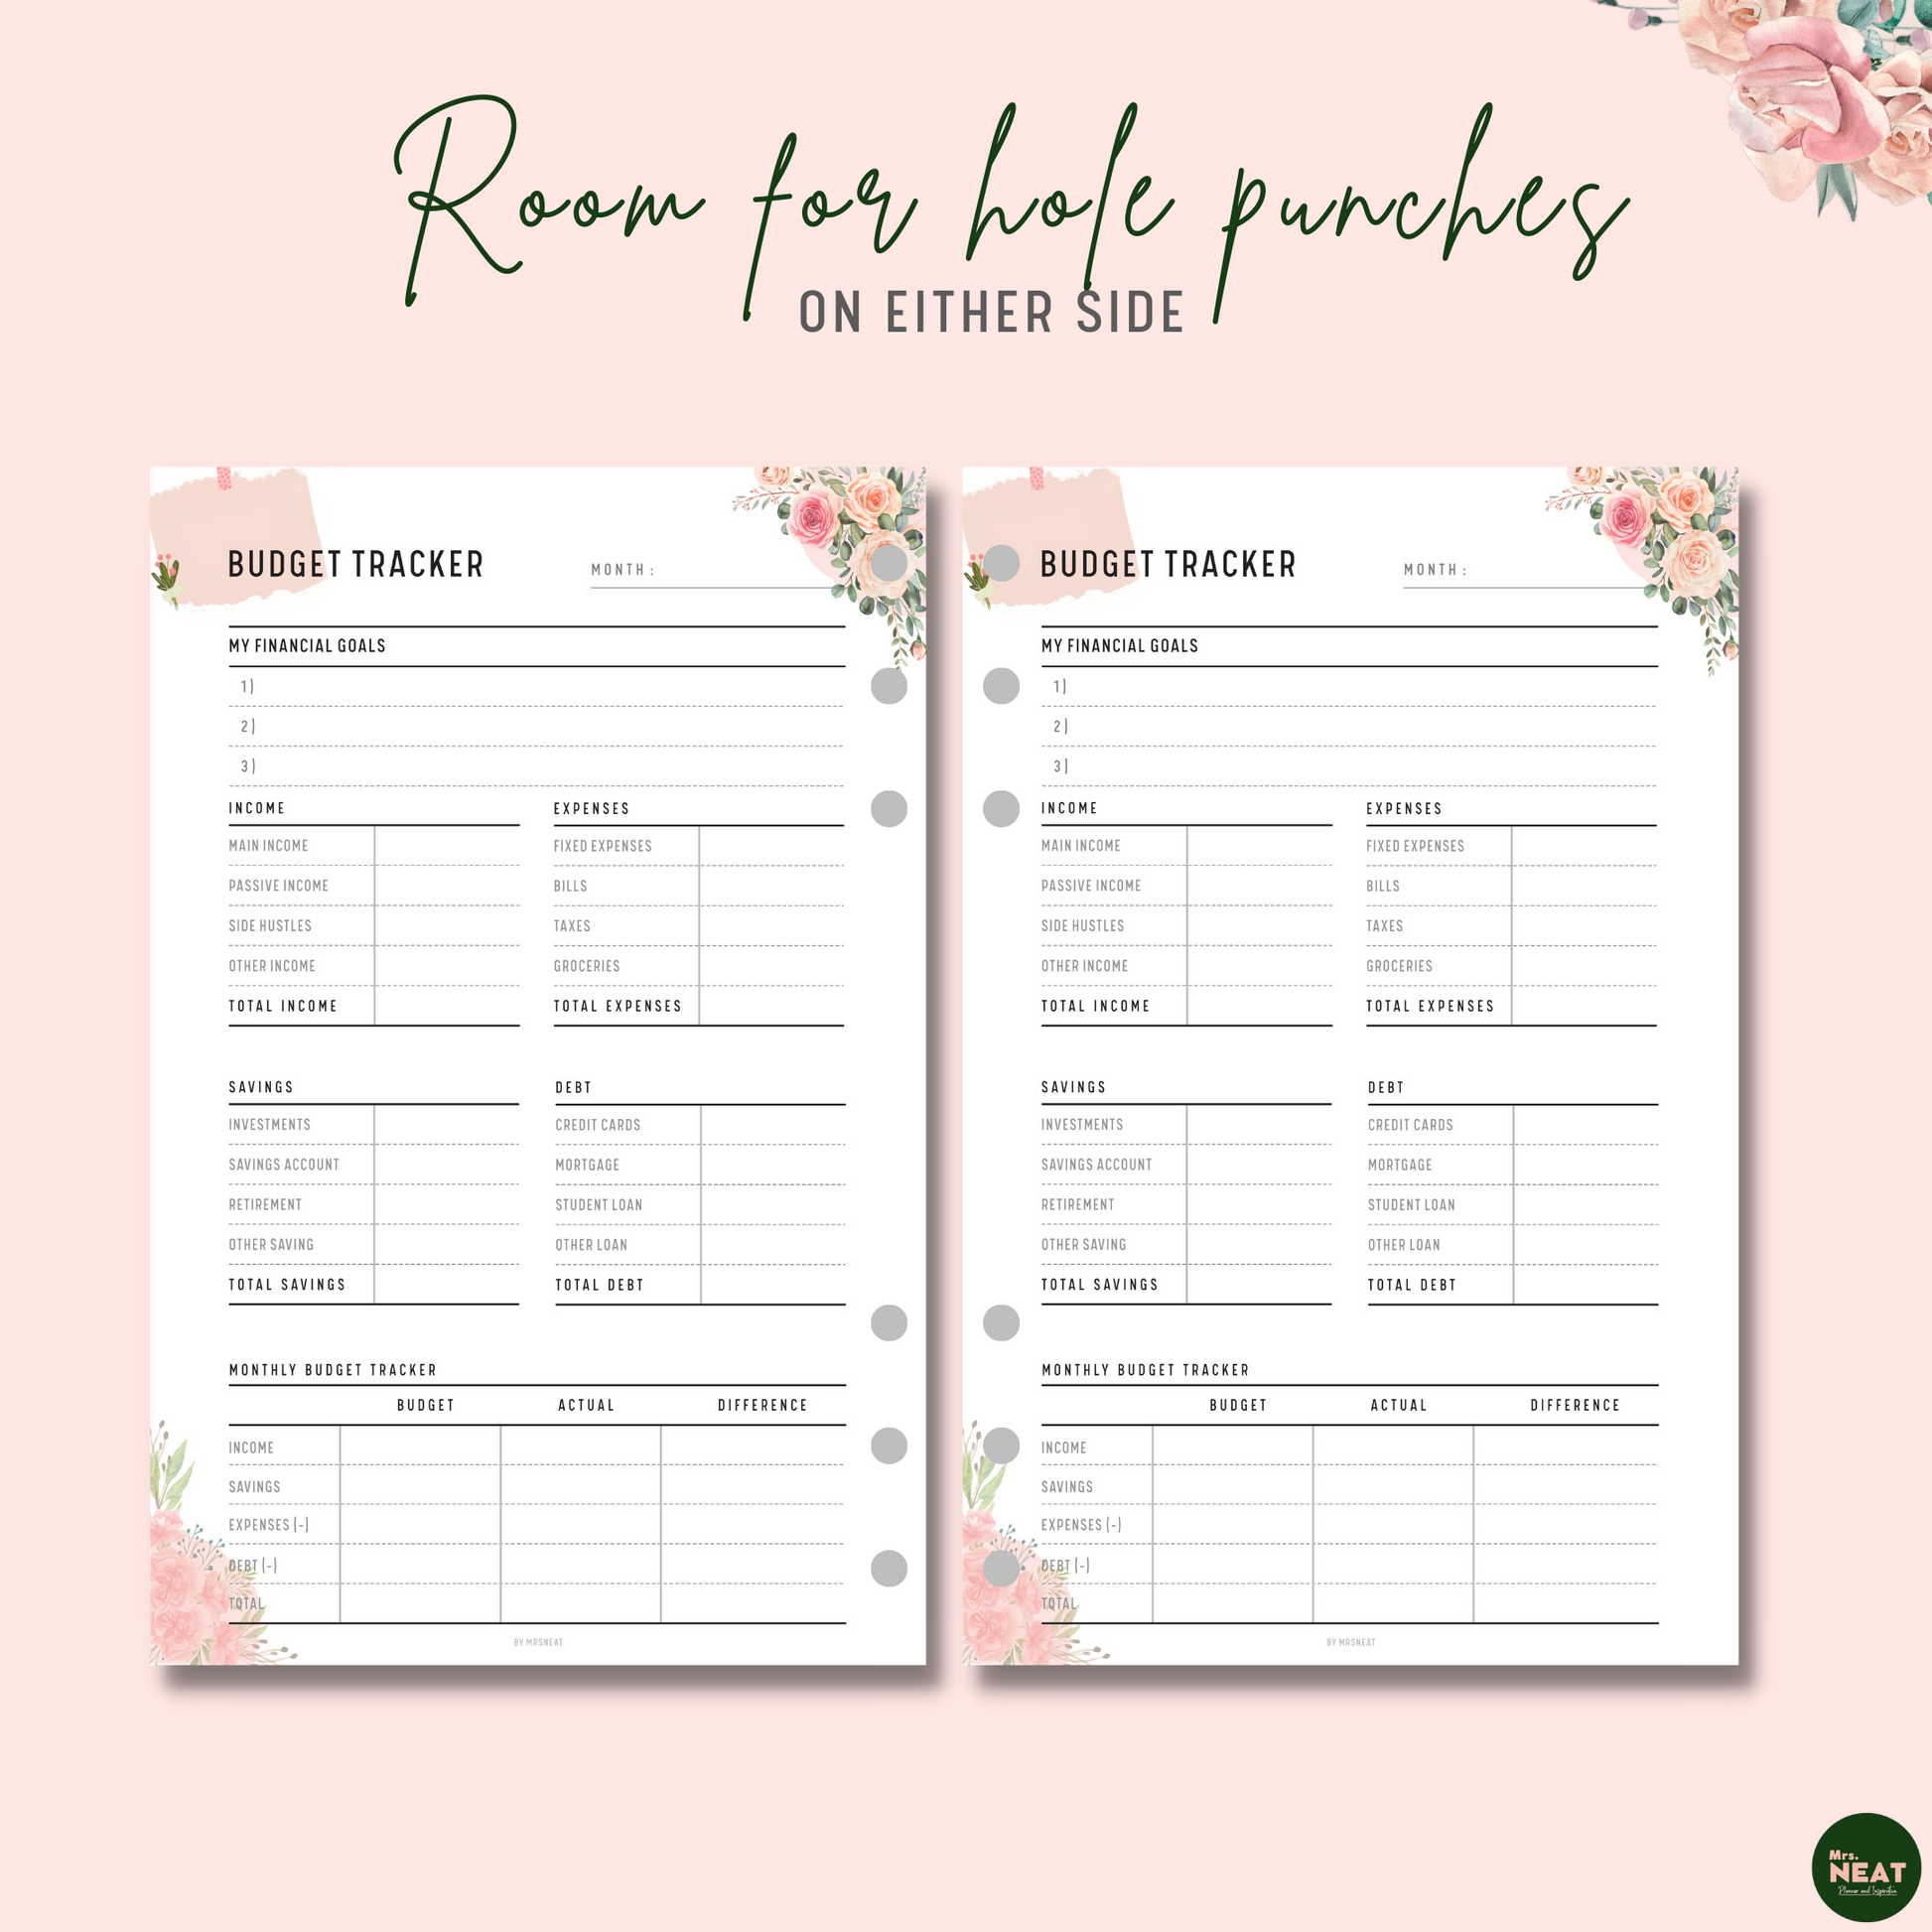 Cute Pink Floral Budget Tracker with room for hole punches on either side 